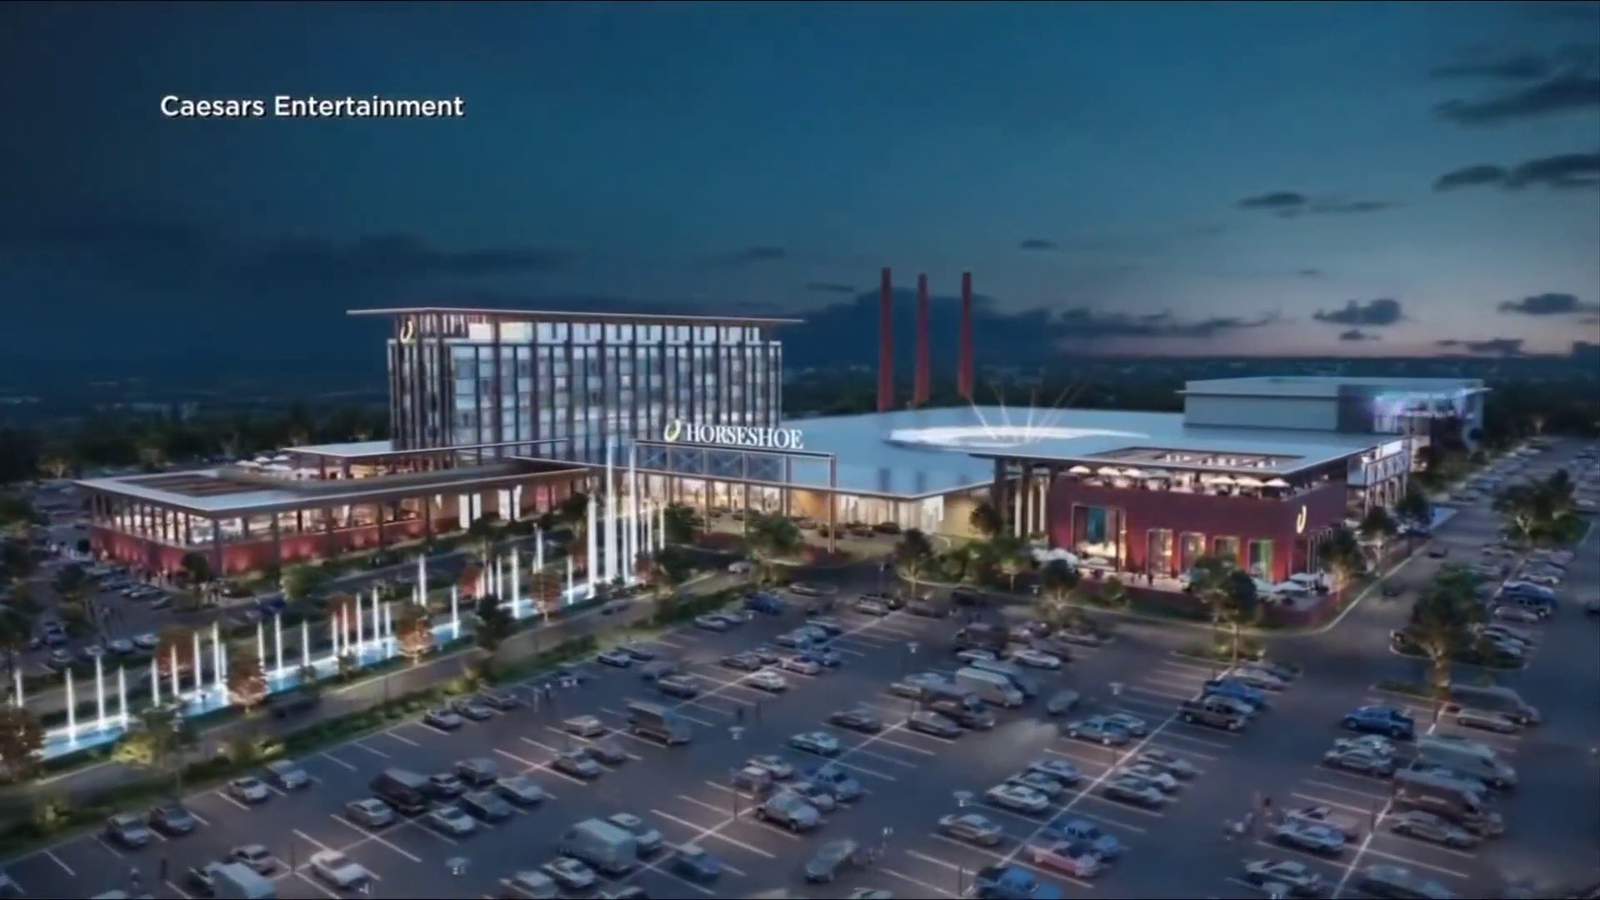 Danville to get $15 million from Caesars Entertainment for new casino scheduled to open in 2023